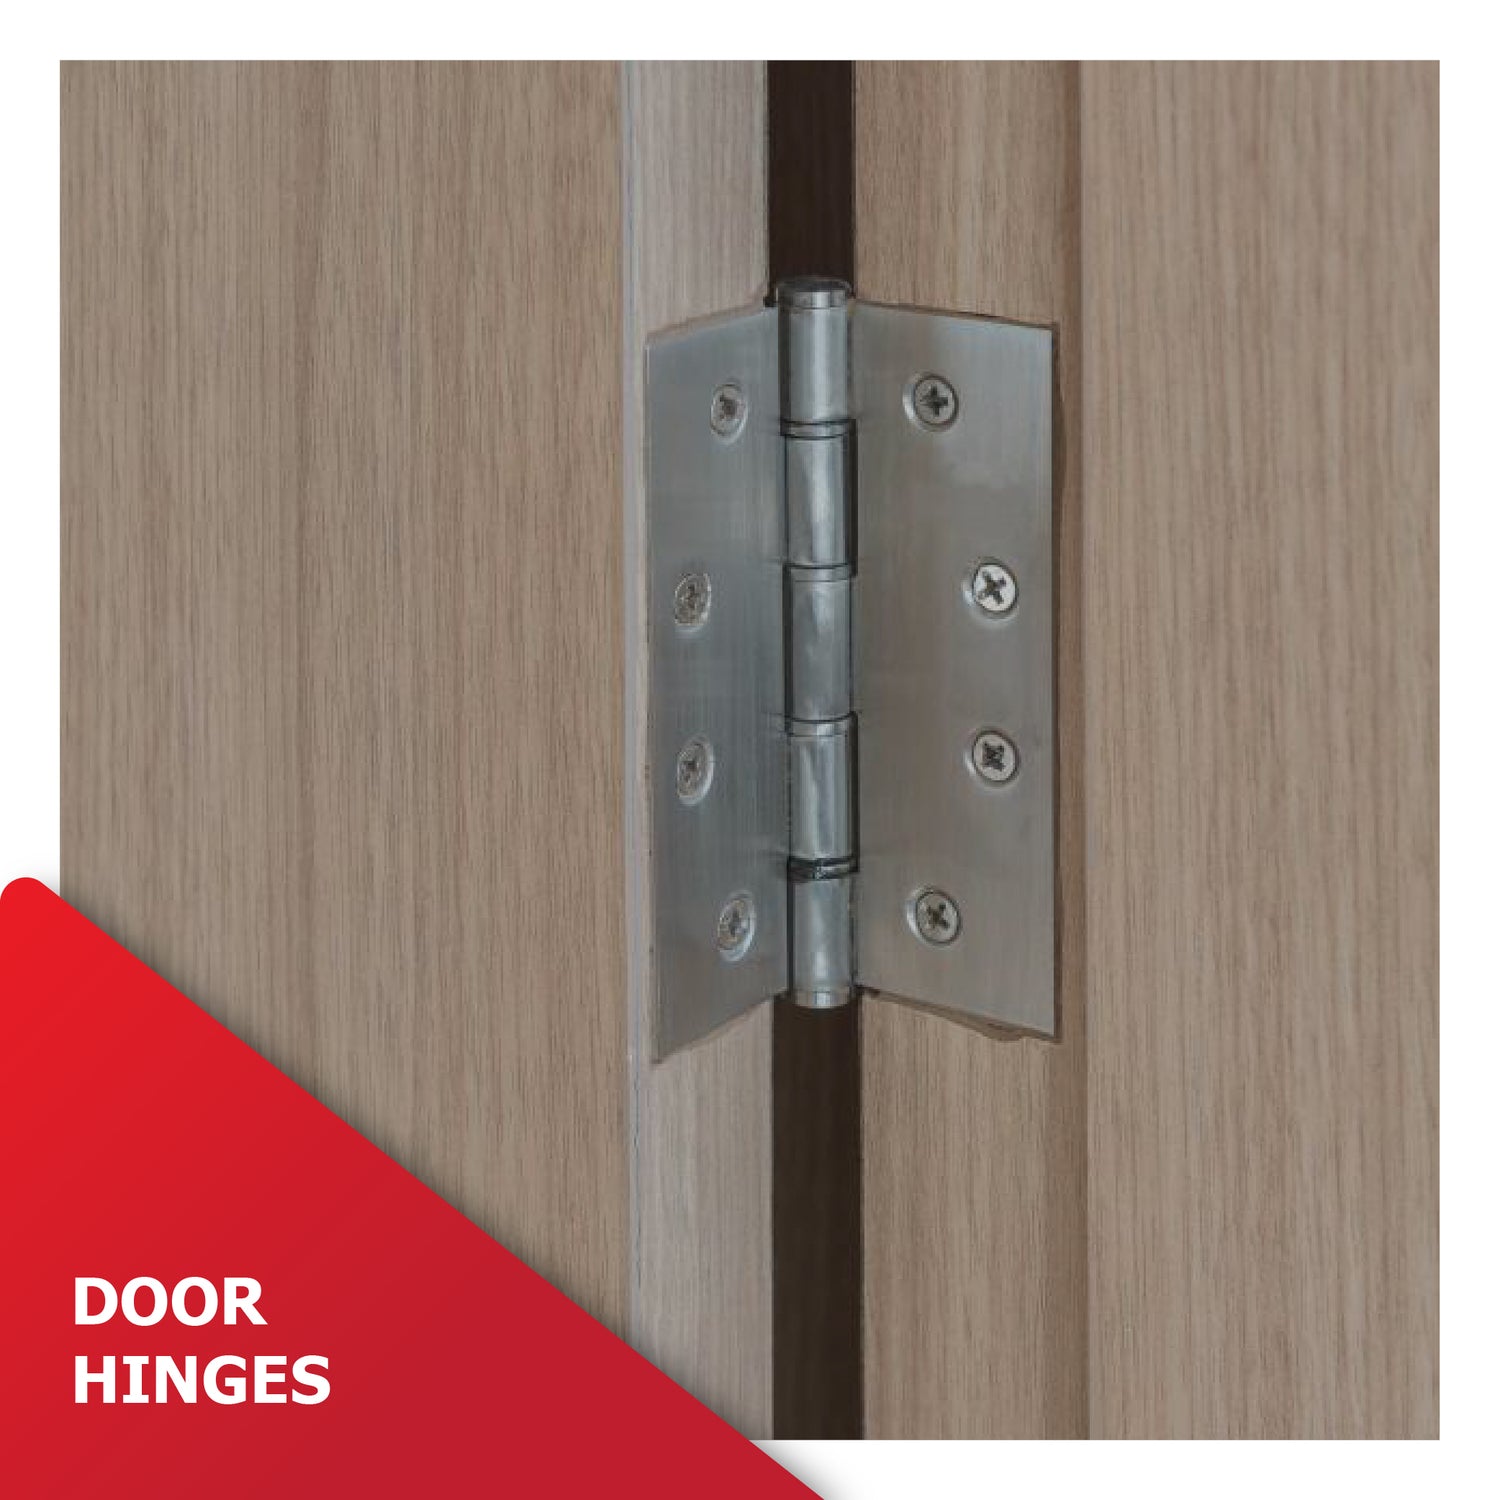 Variety of door hinges for enhanced functionality and aesthetics.